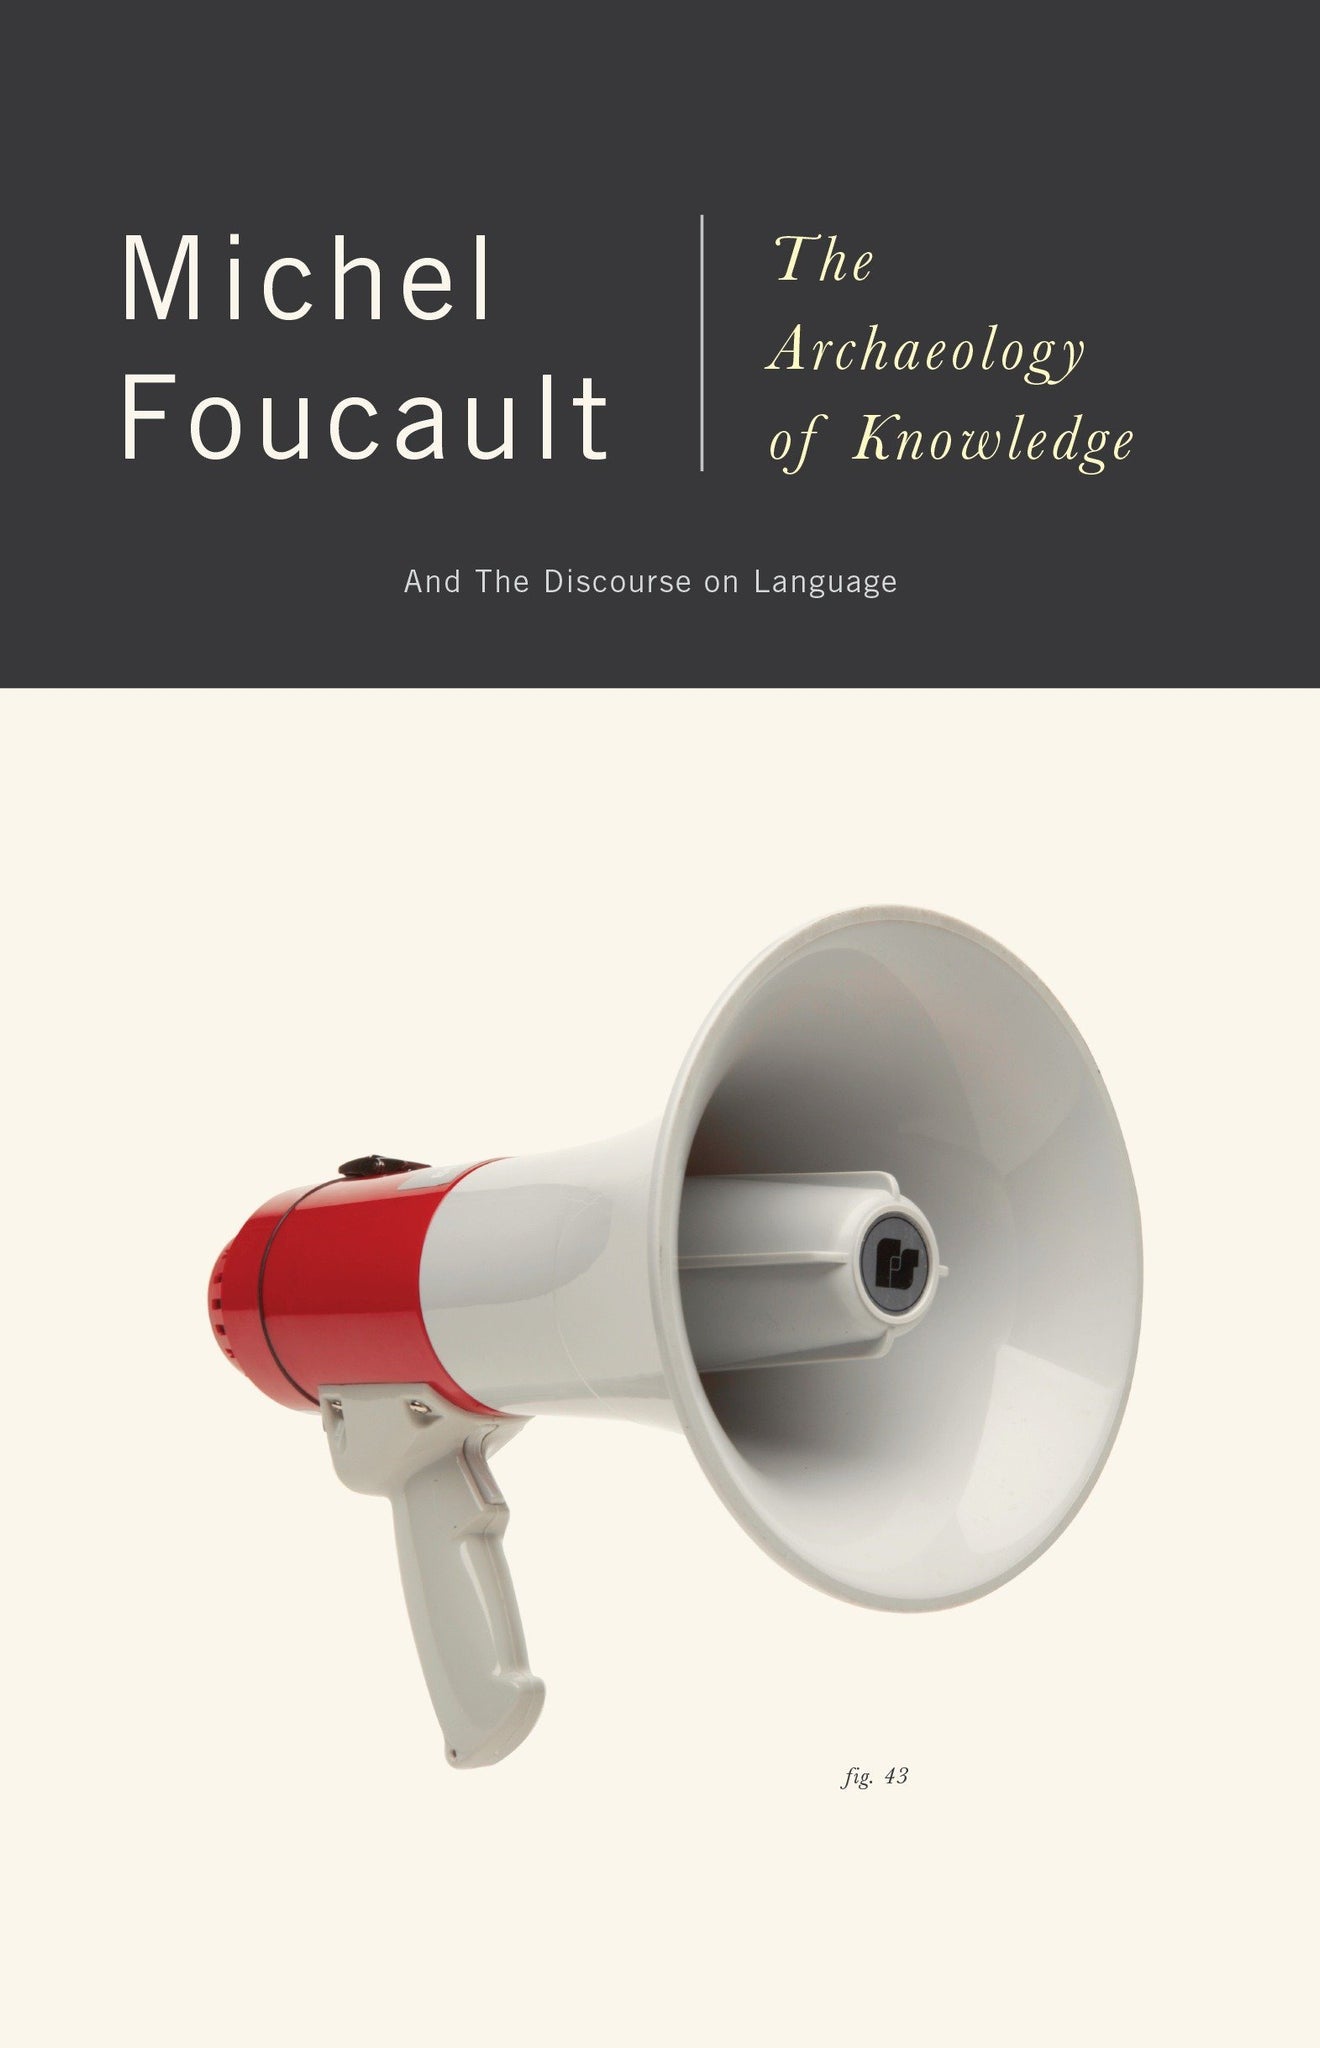 The Archaeology of Knowledge by Michel Foucault - Book at Kavi Gupta Editions